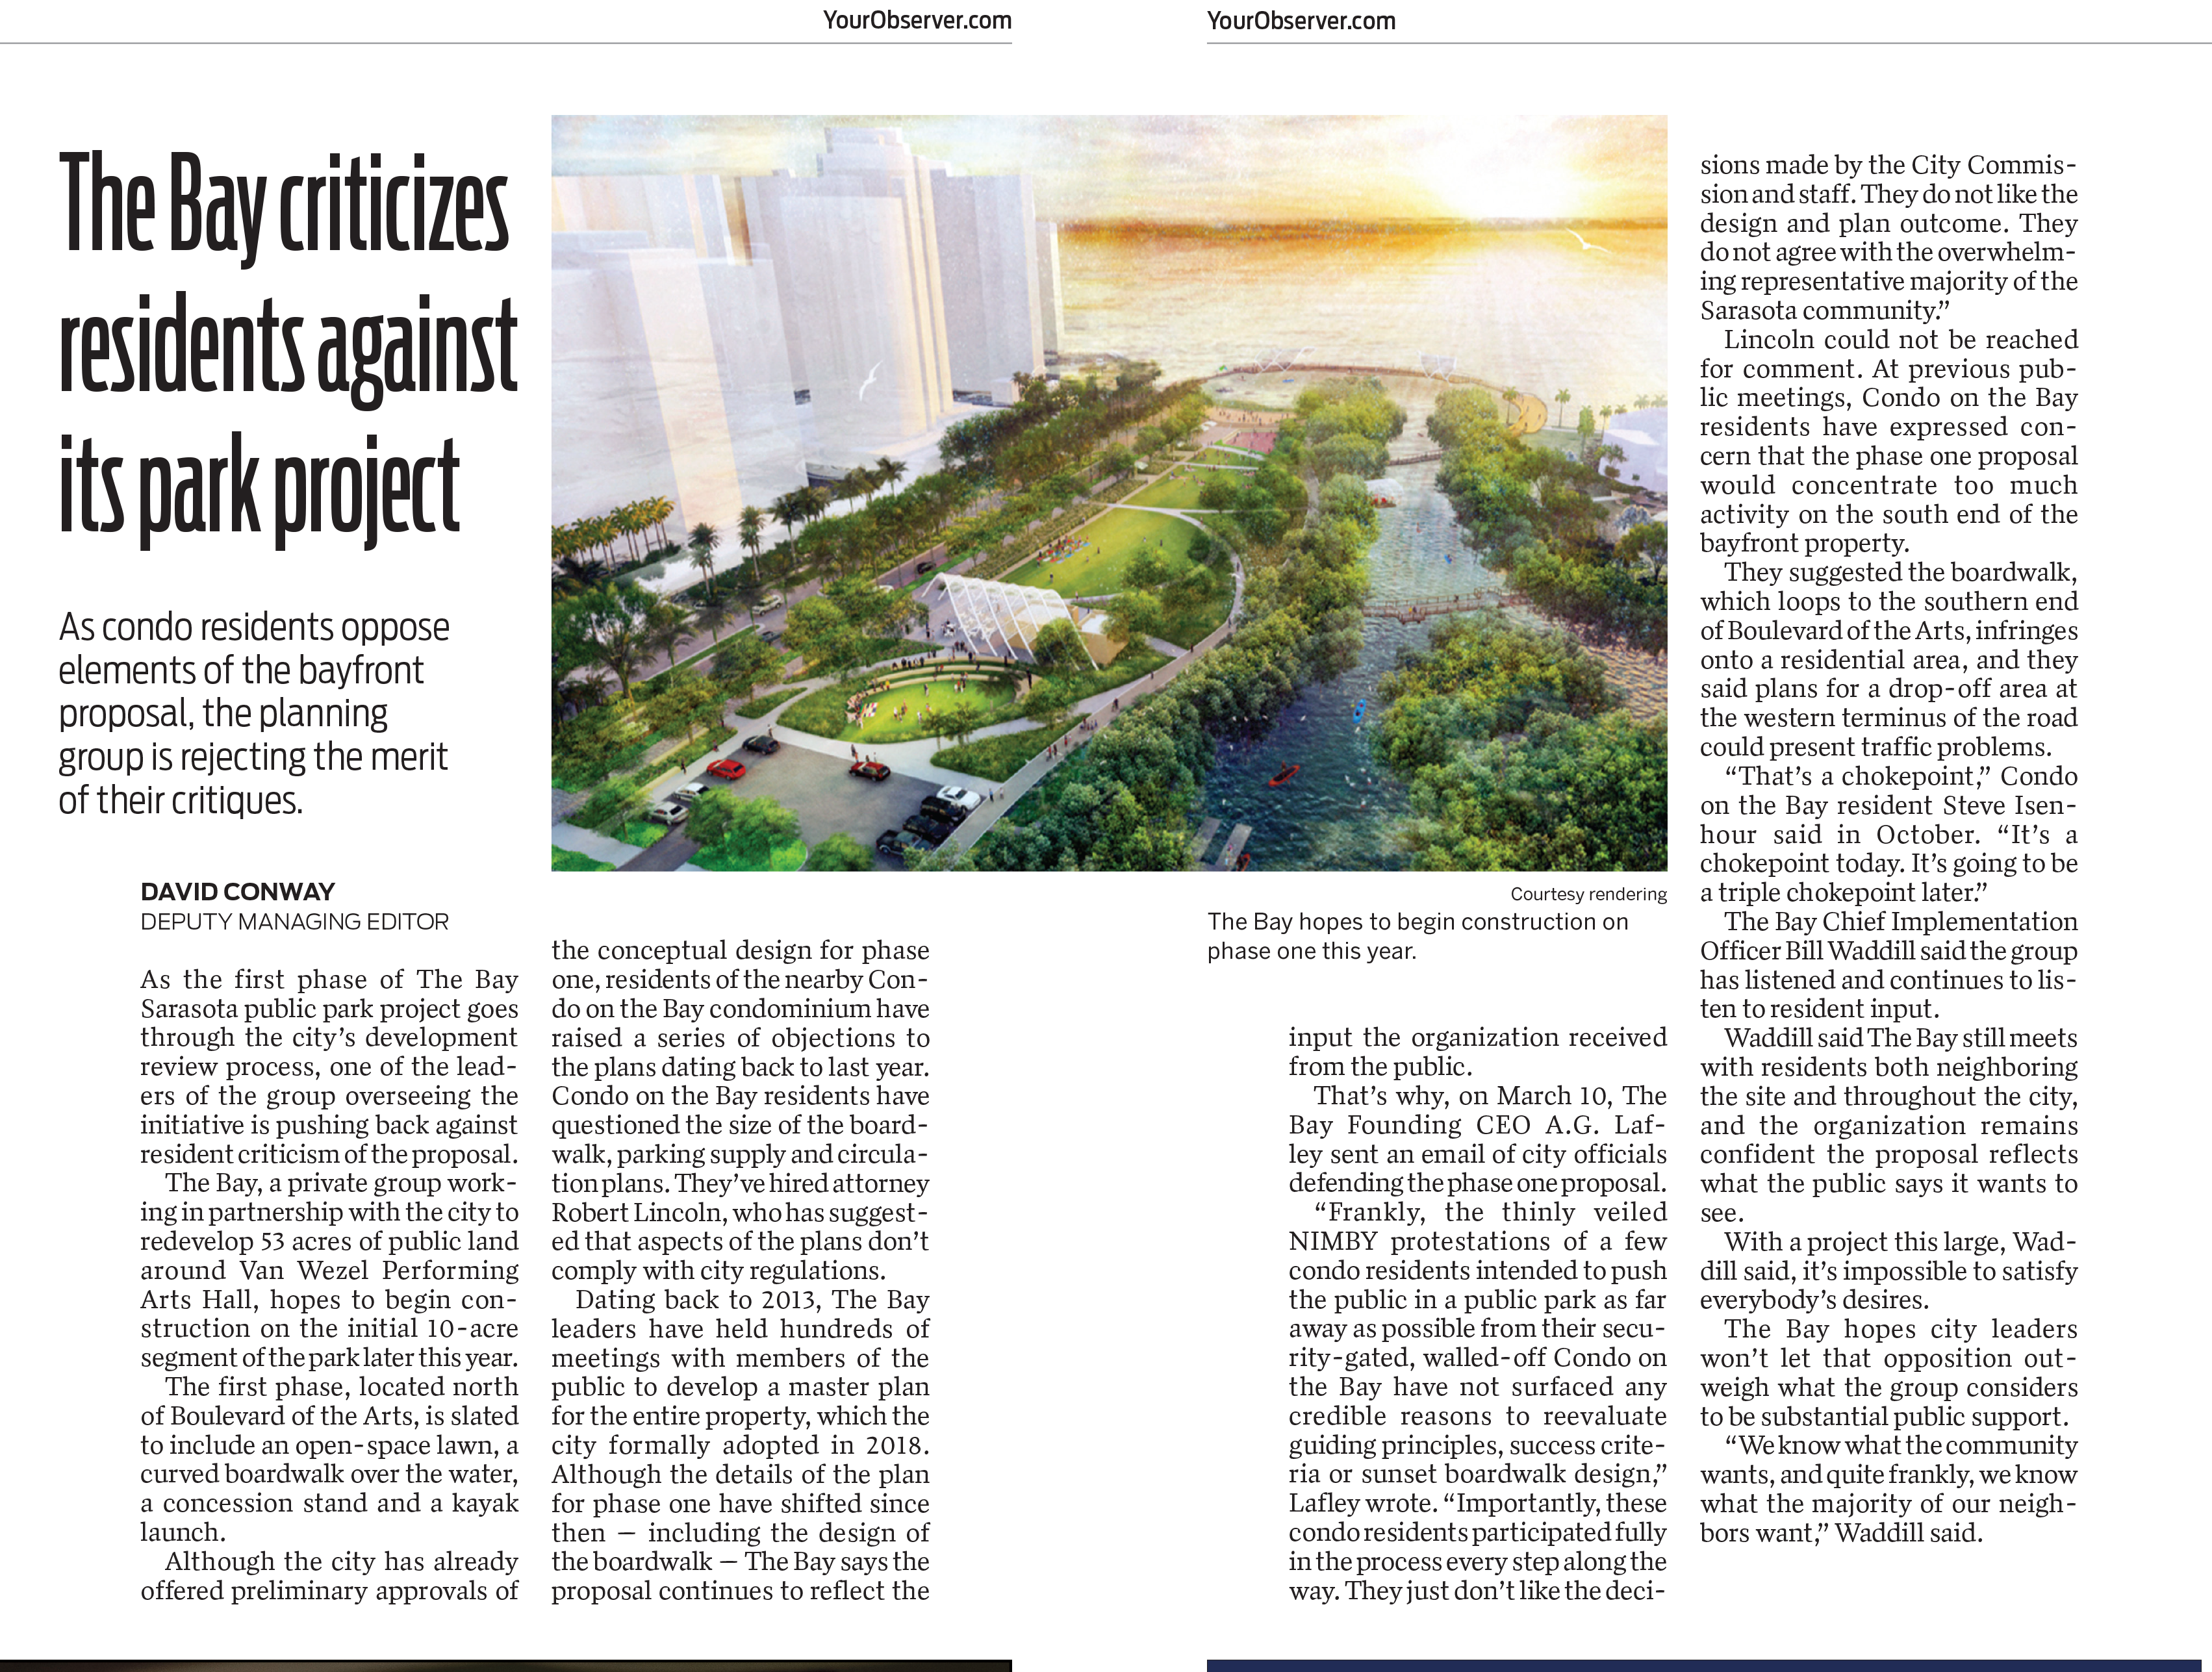 The Bay criticizes residents against its park project - The Bay Sarasota